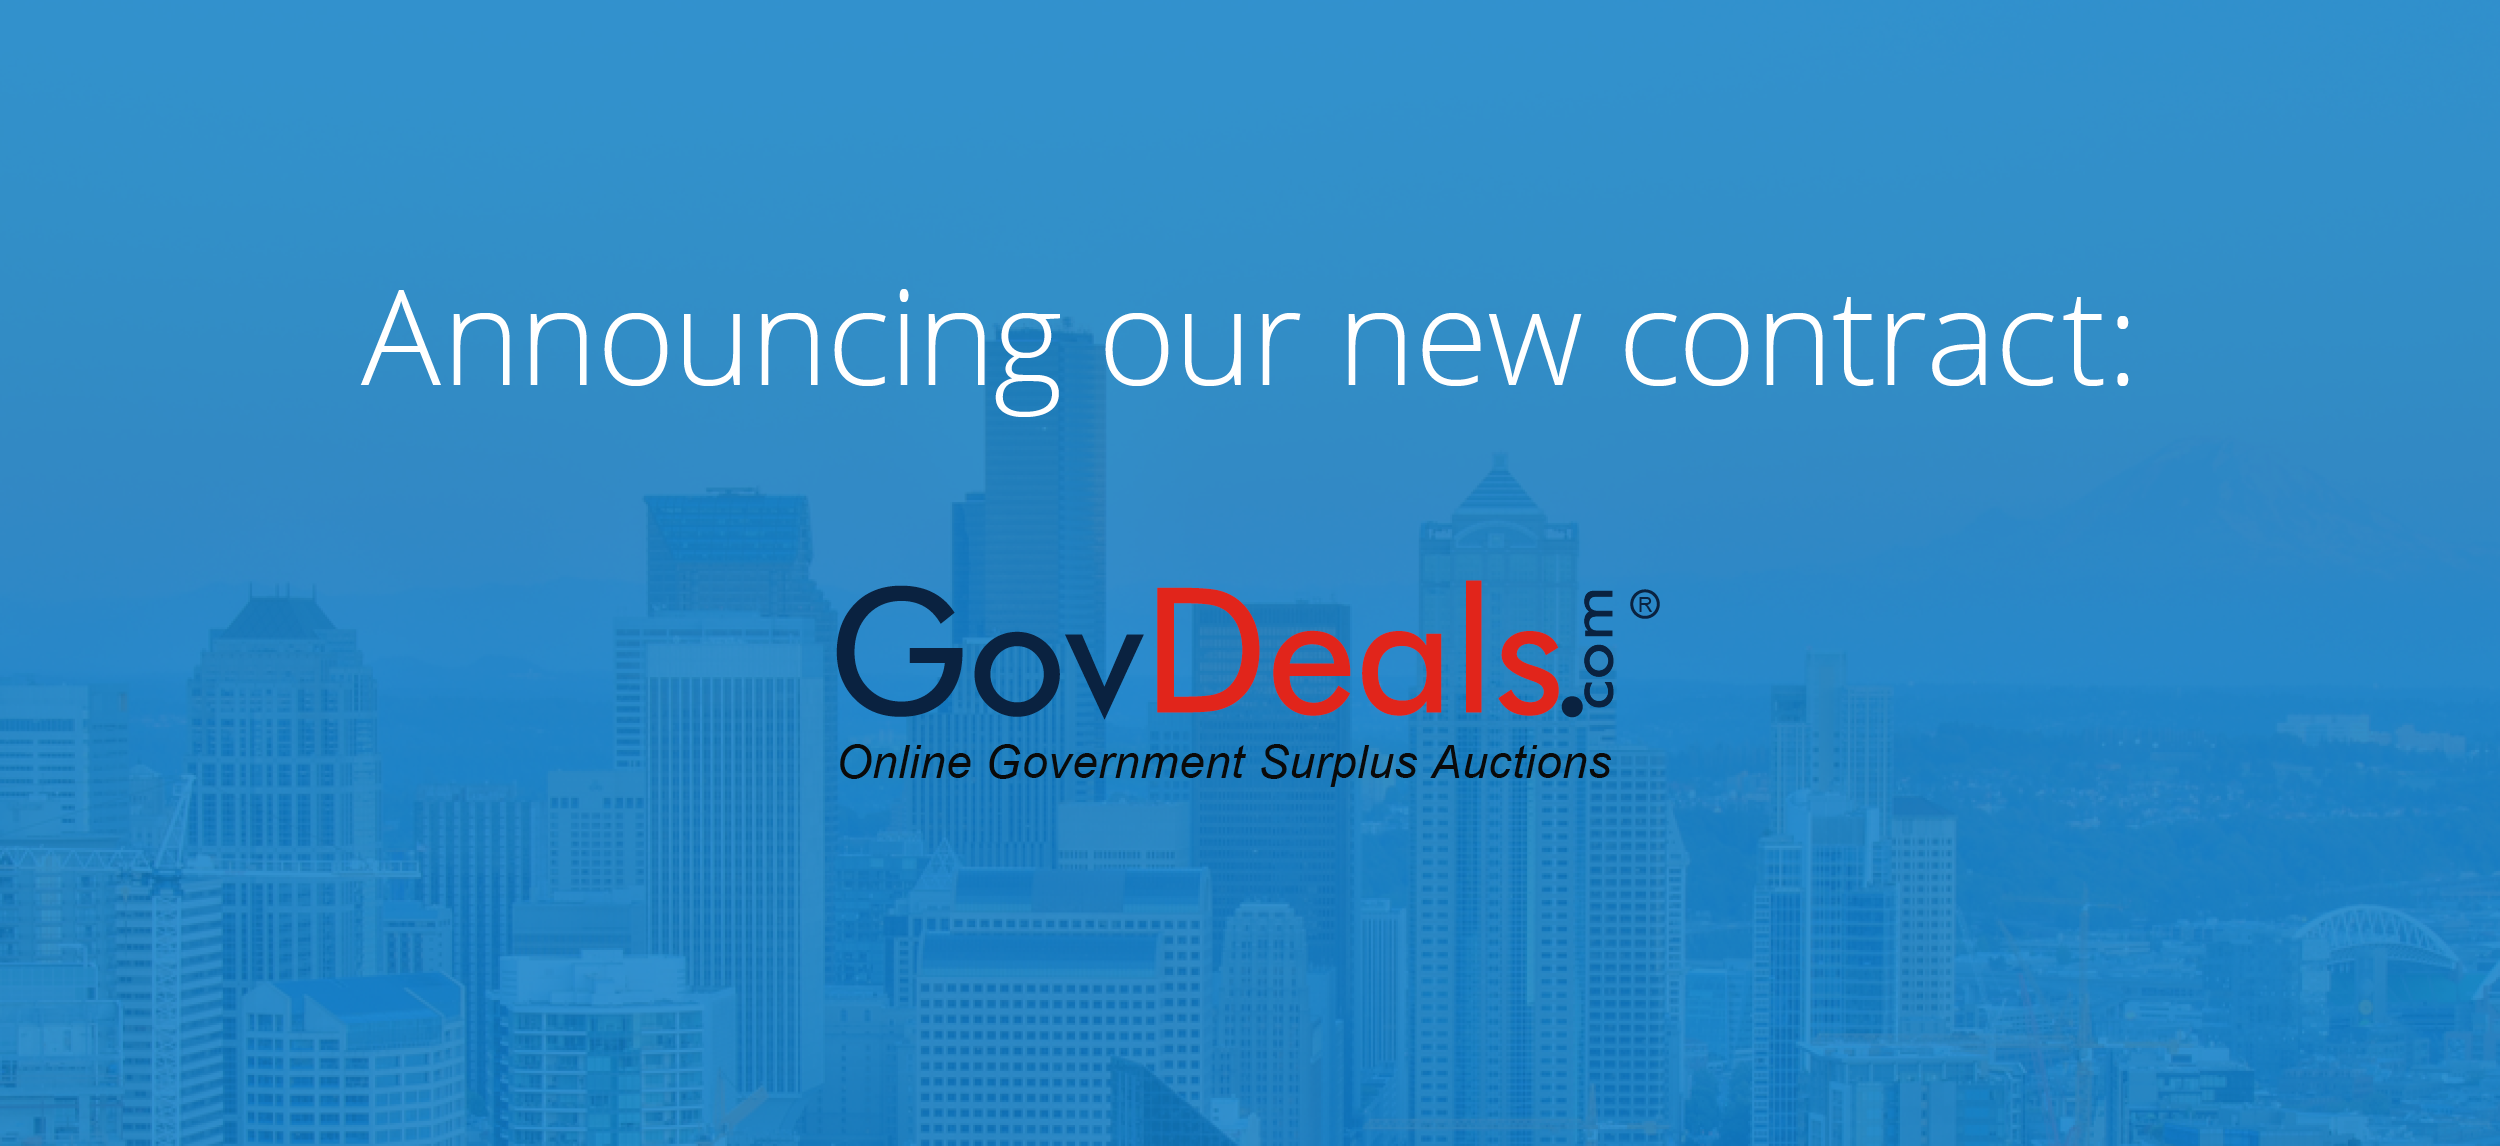 Announcing GovDeals, Inc: Our Newest Contract